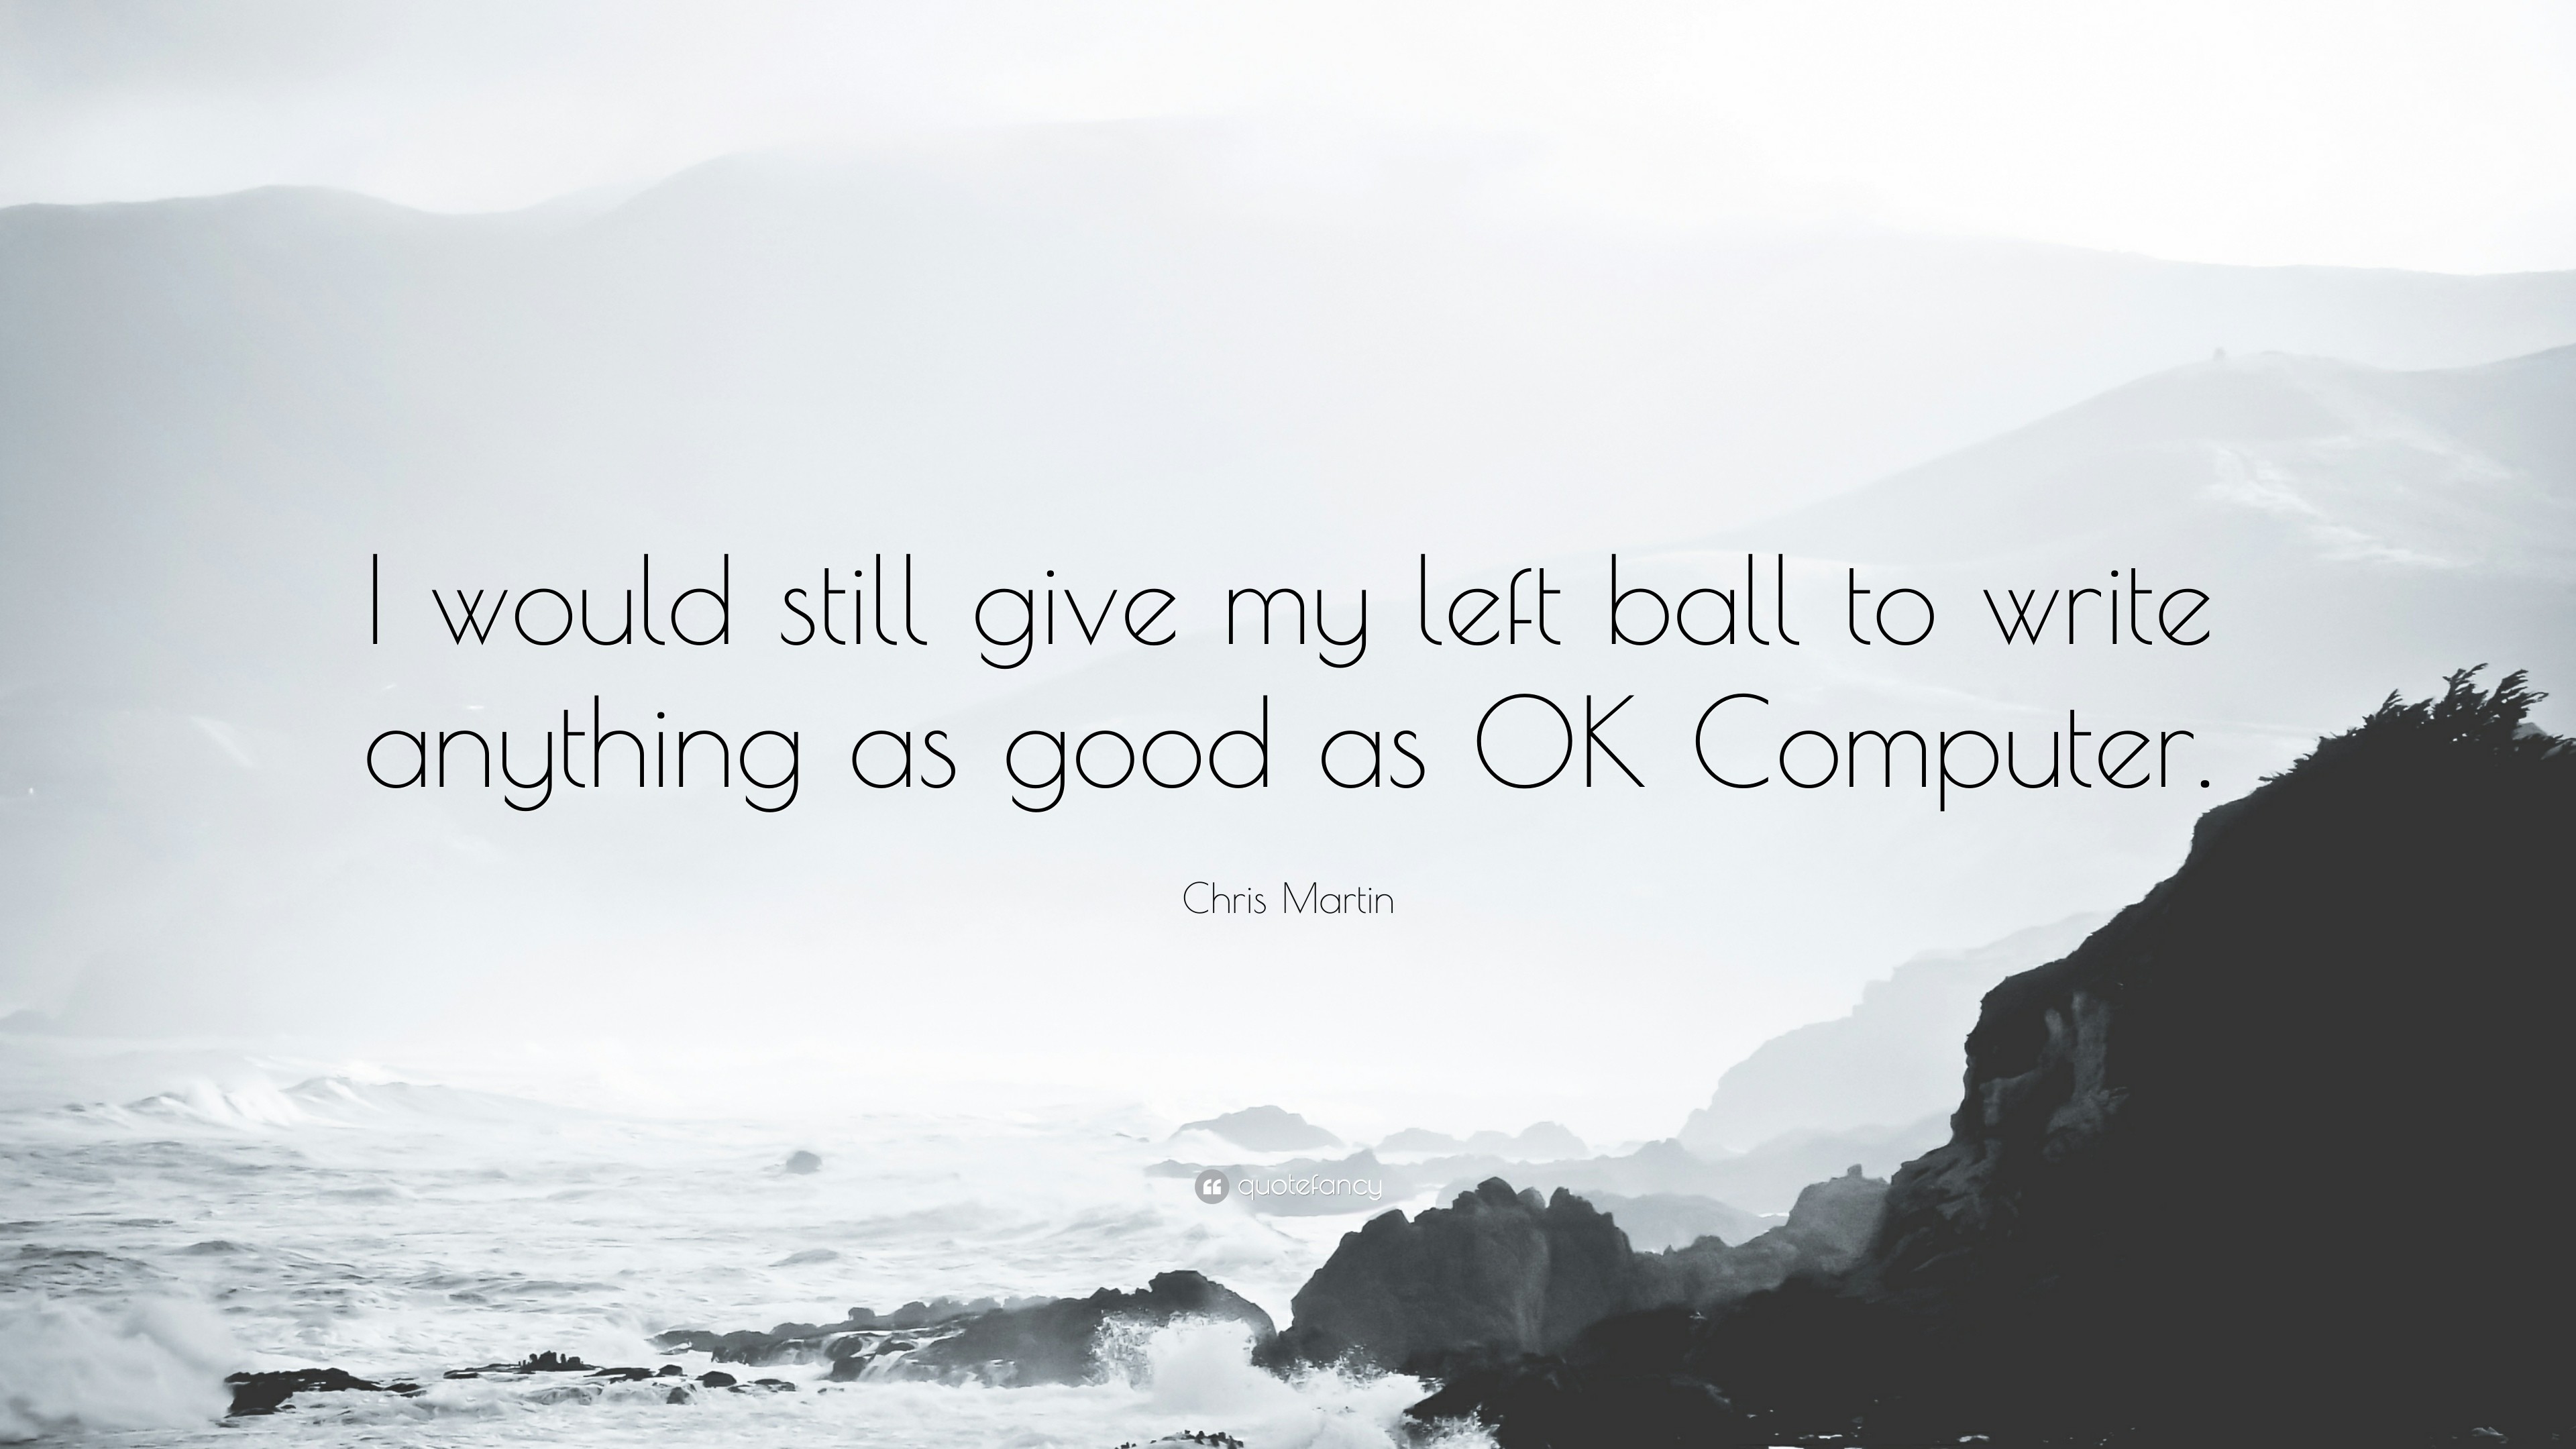 3840x2160 Chris Martin Quote: “I would still give my left ball to write anything as